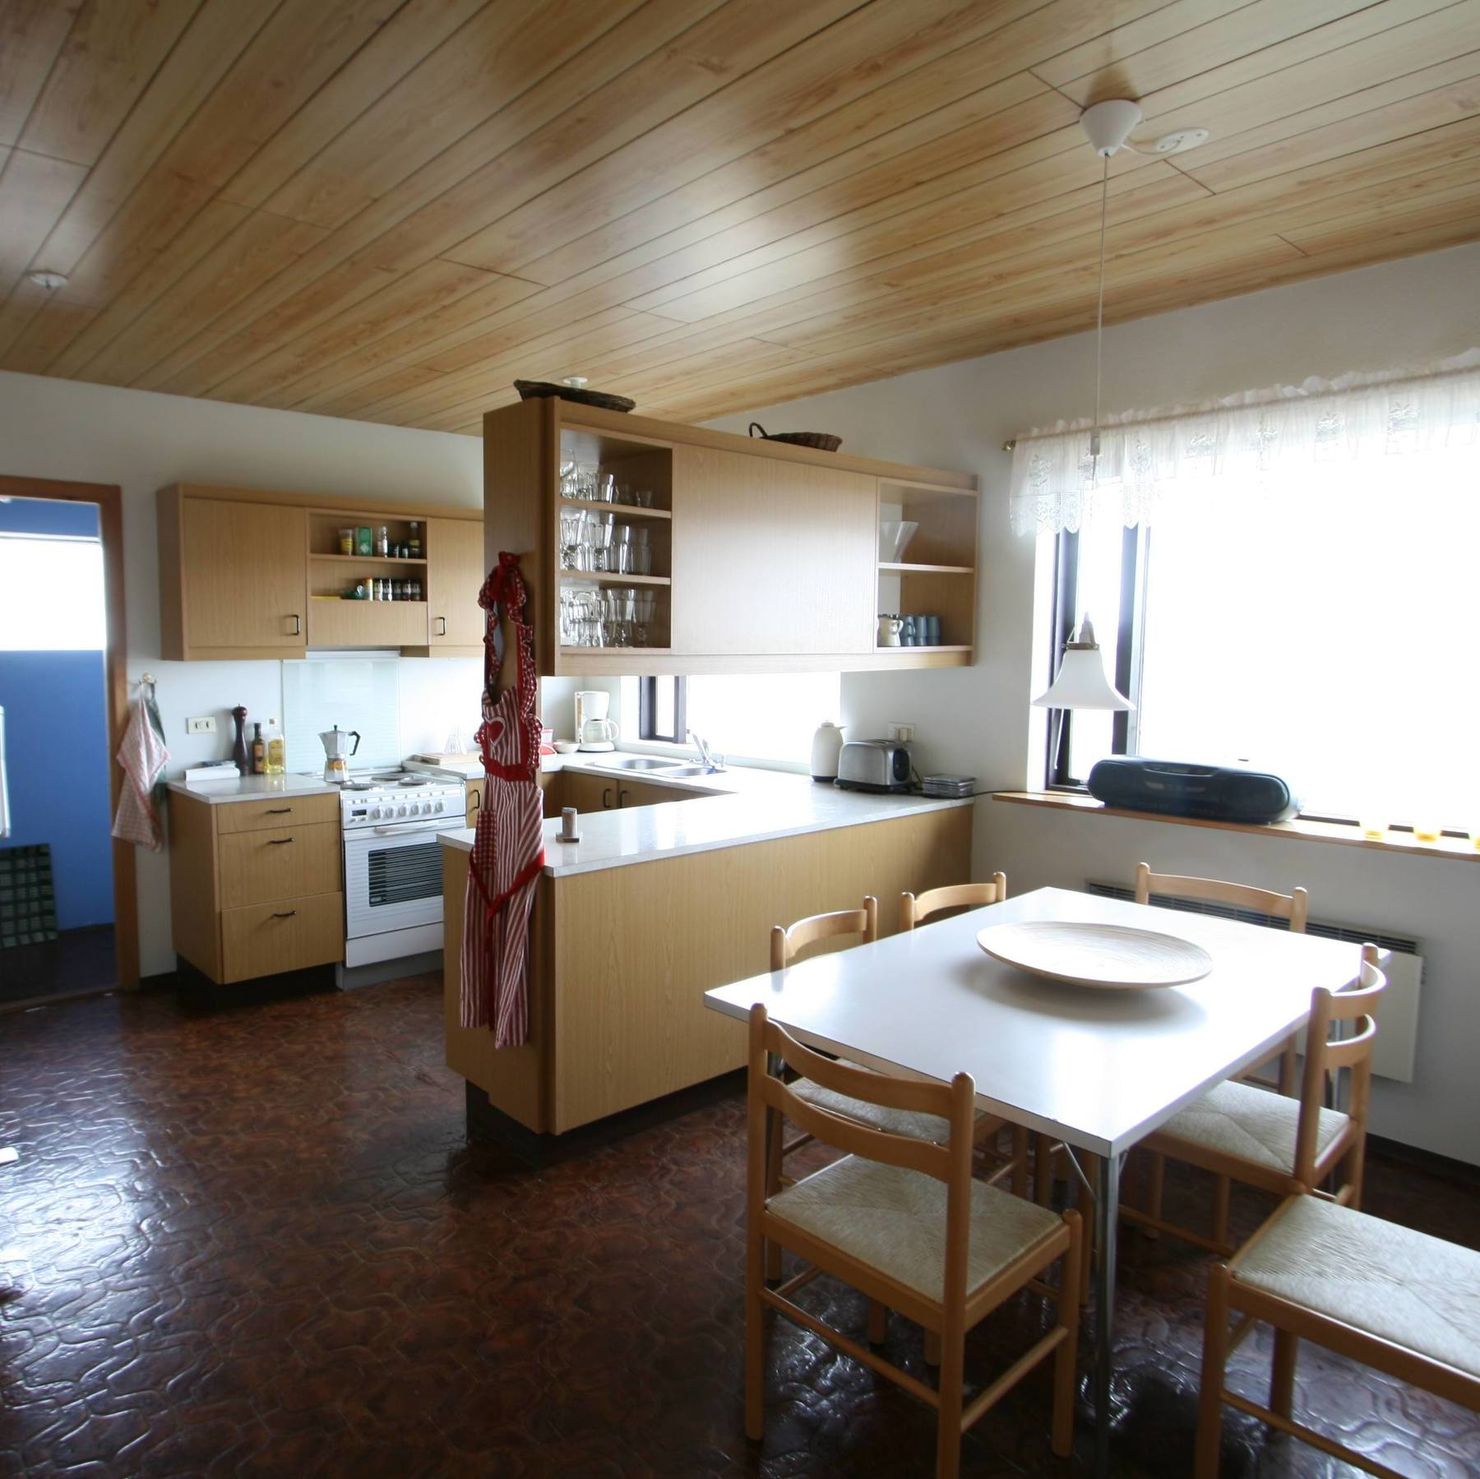 The kitchen of the holiday home with dining table for up to 6 people